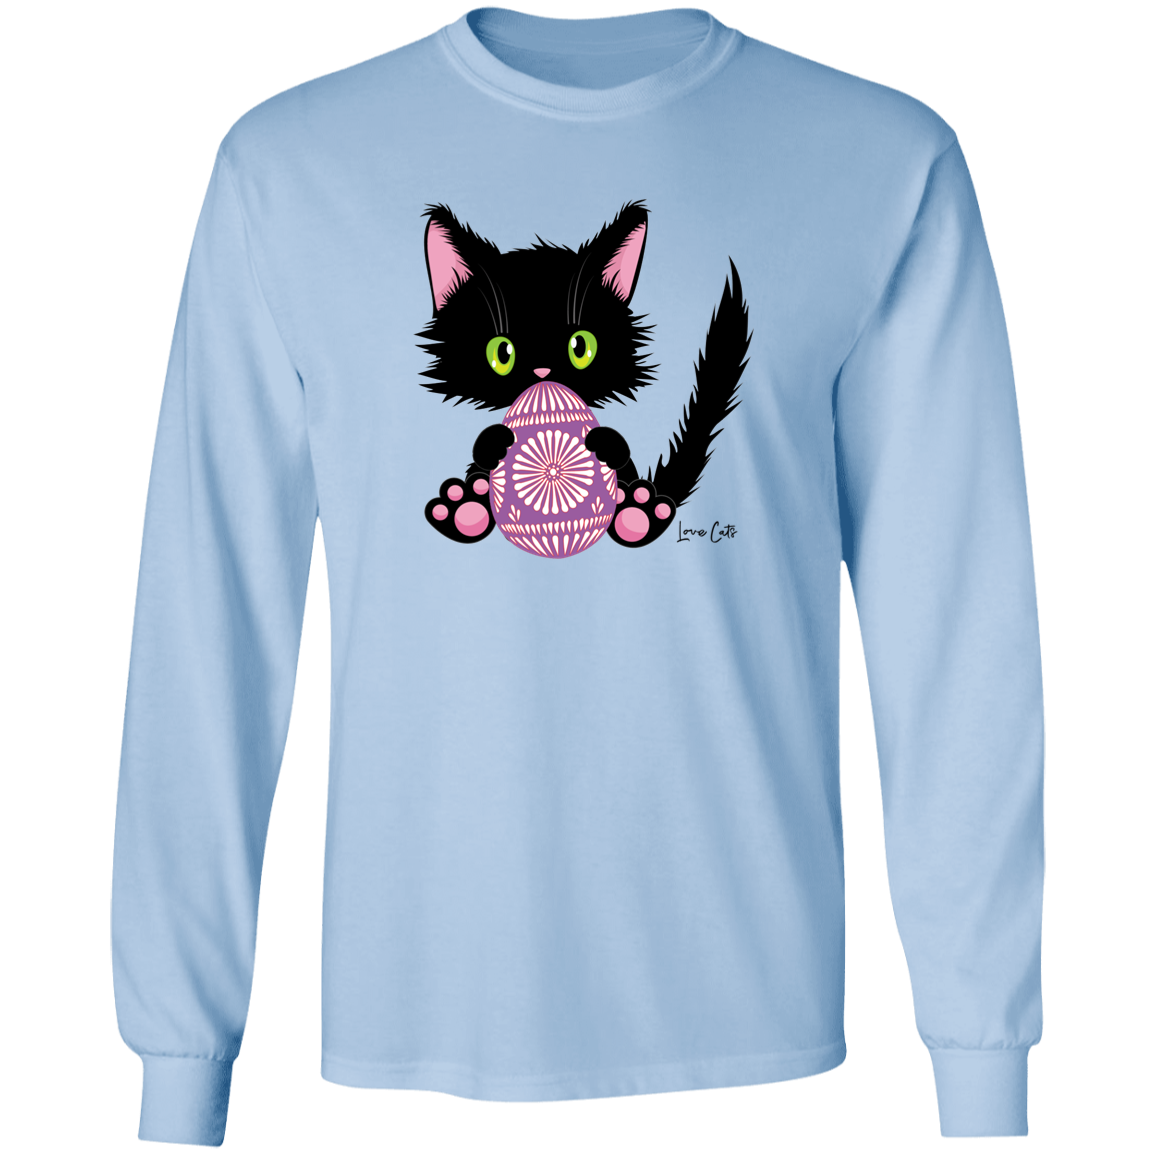 Lucky the Black Cat with Easter Egg LS Ultra Cotton T-Shirt